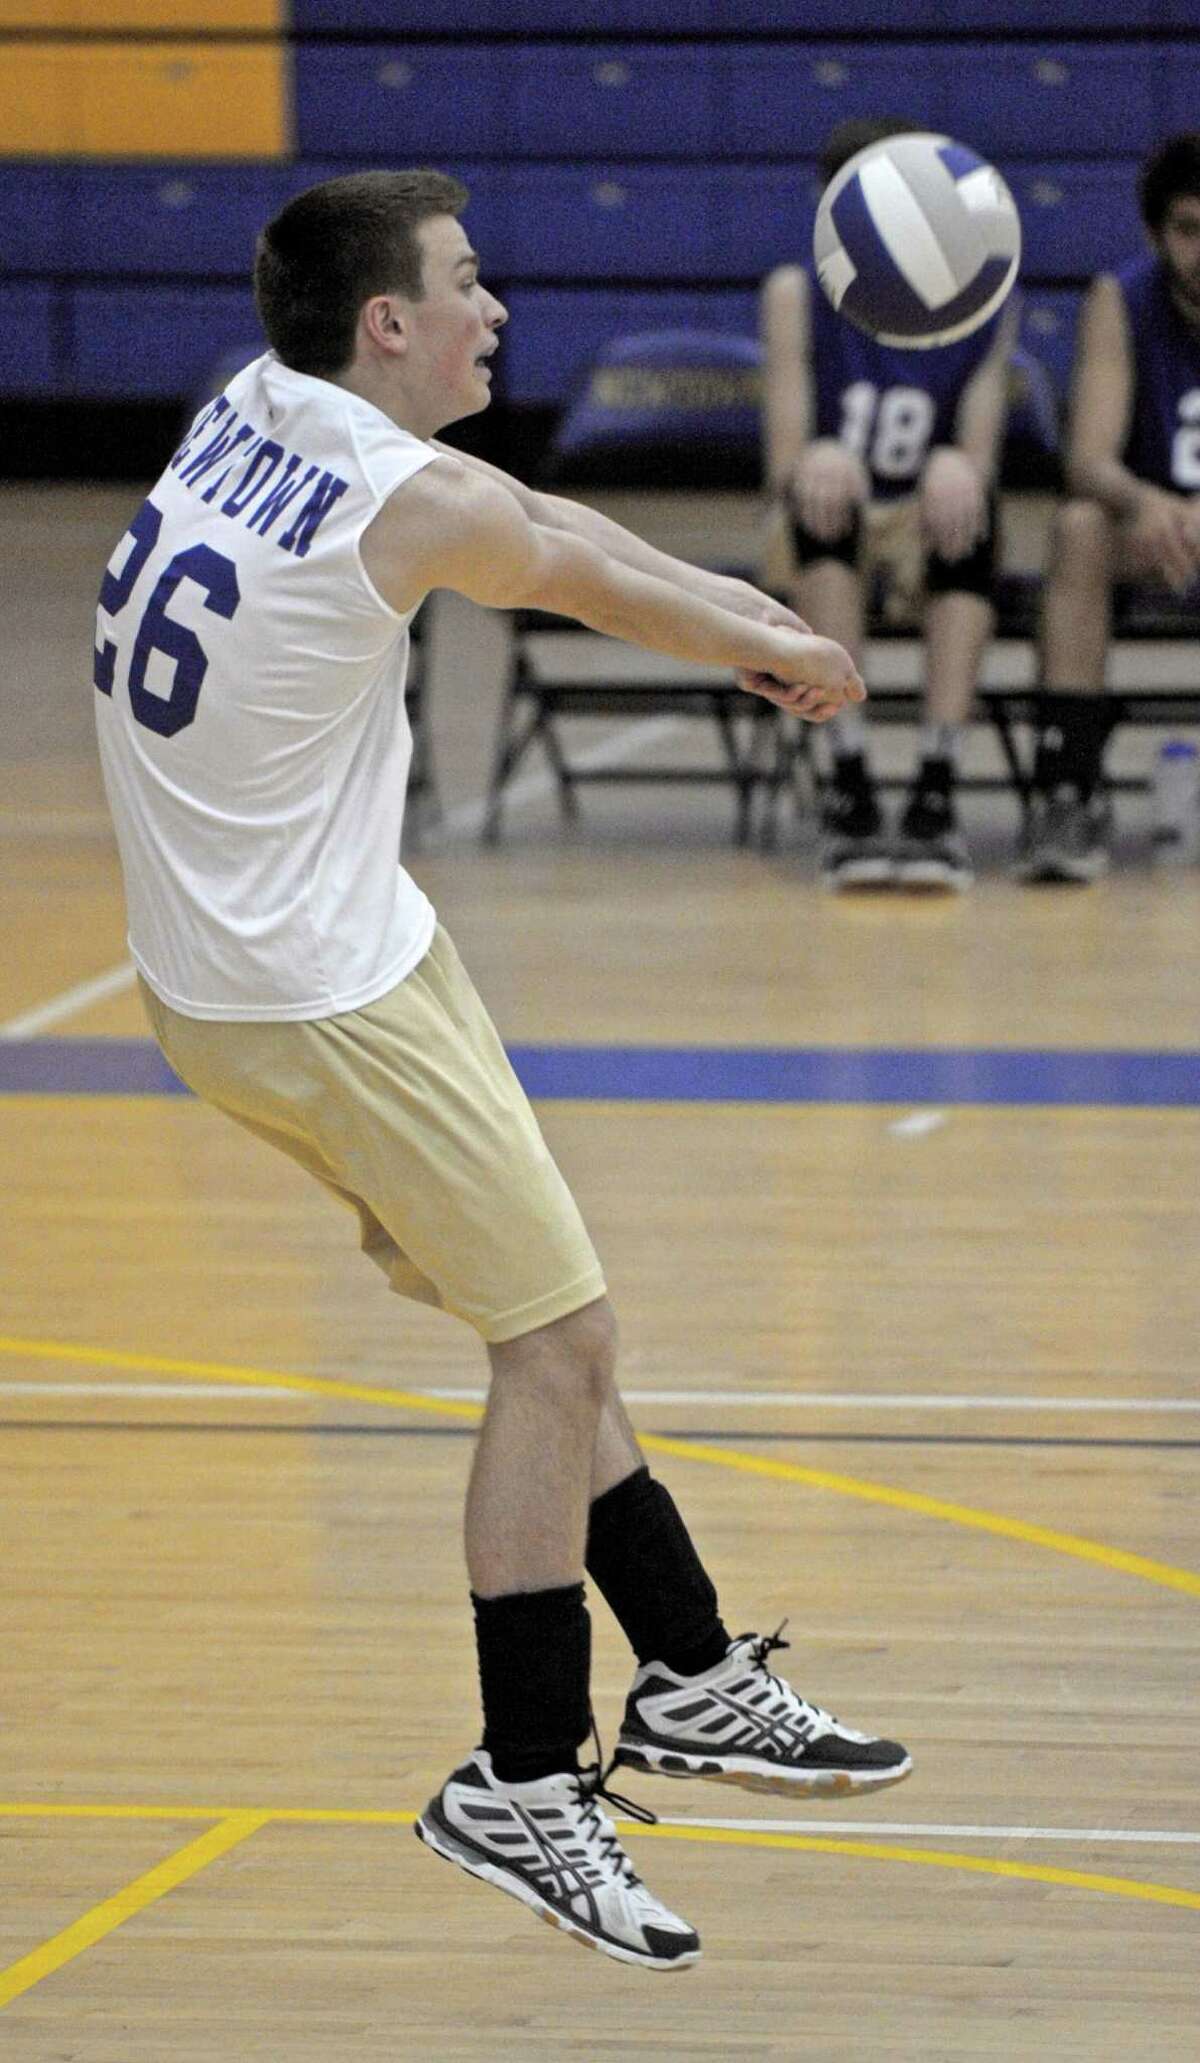 FILE PHOTO: Newtown's libero Jackson Fletcher (26) returns a serve during the boys high school volleyball game between Shelton and Newtown high schools on Wednesday, April 29, 2015, played at Newtown High School, Newtown, Conn.